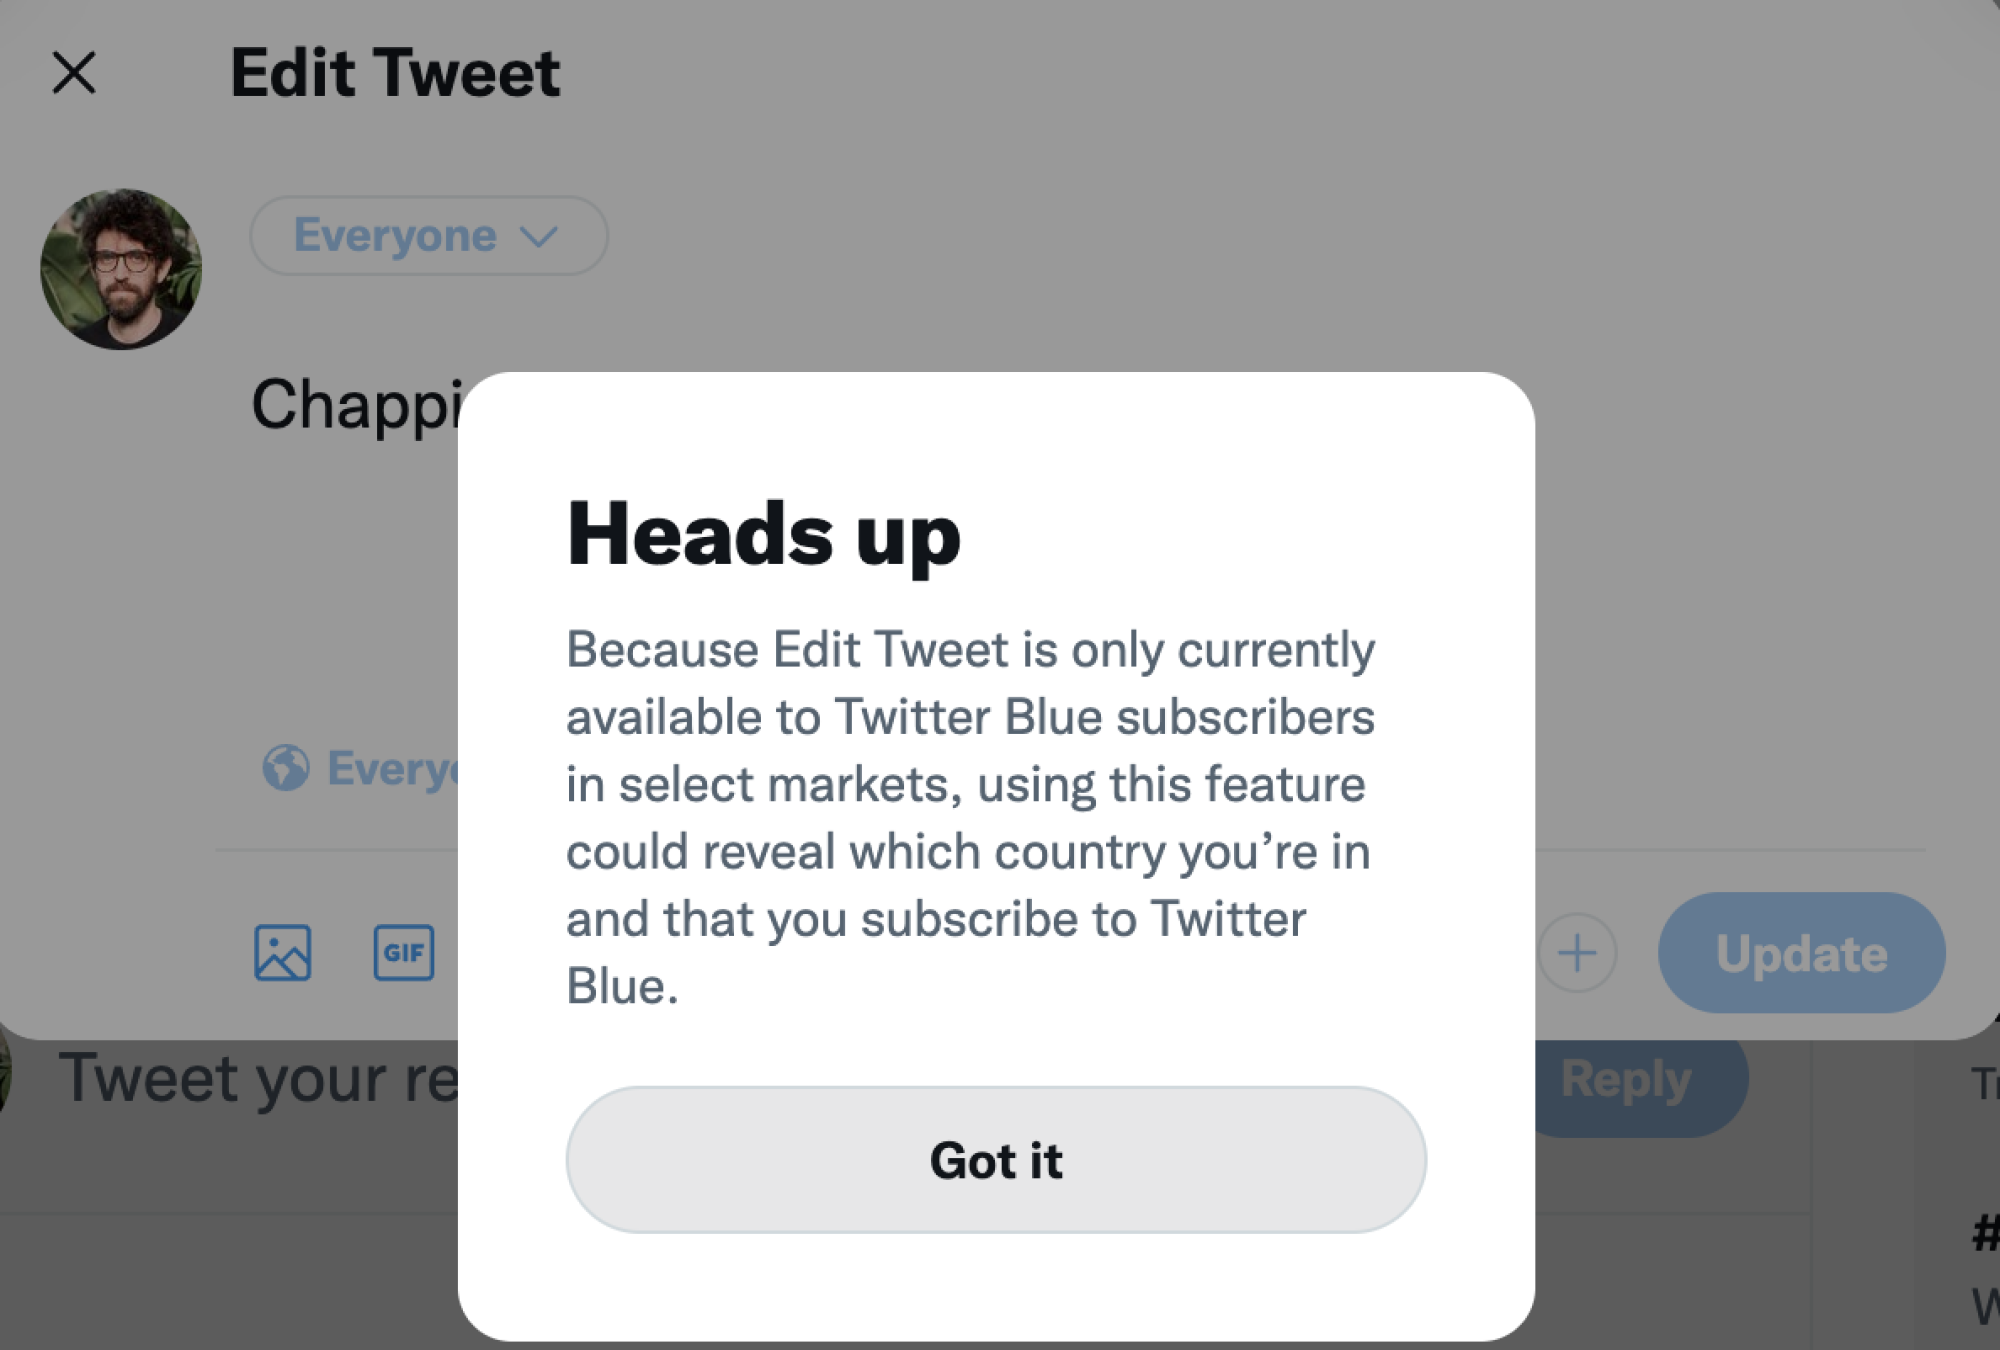 A pop-up from Twitter warning the user that the edit feature "could reveal which country you're in."